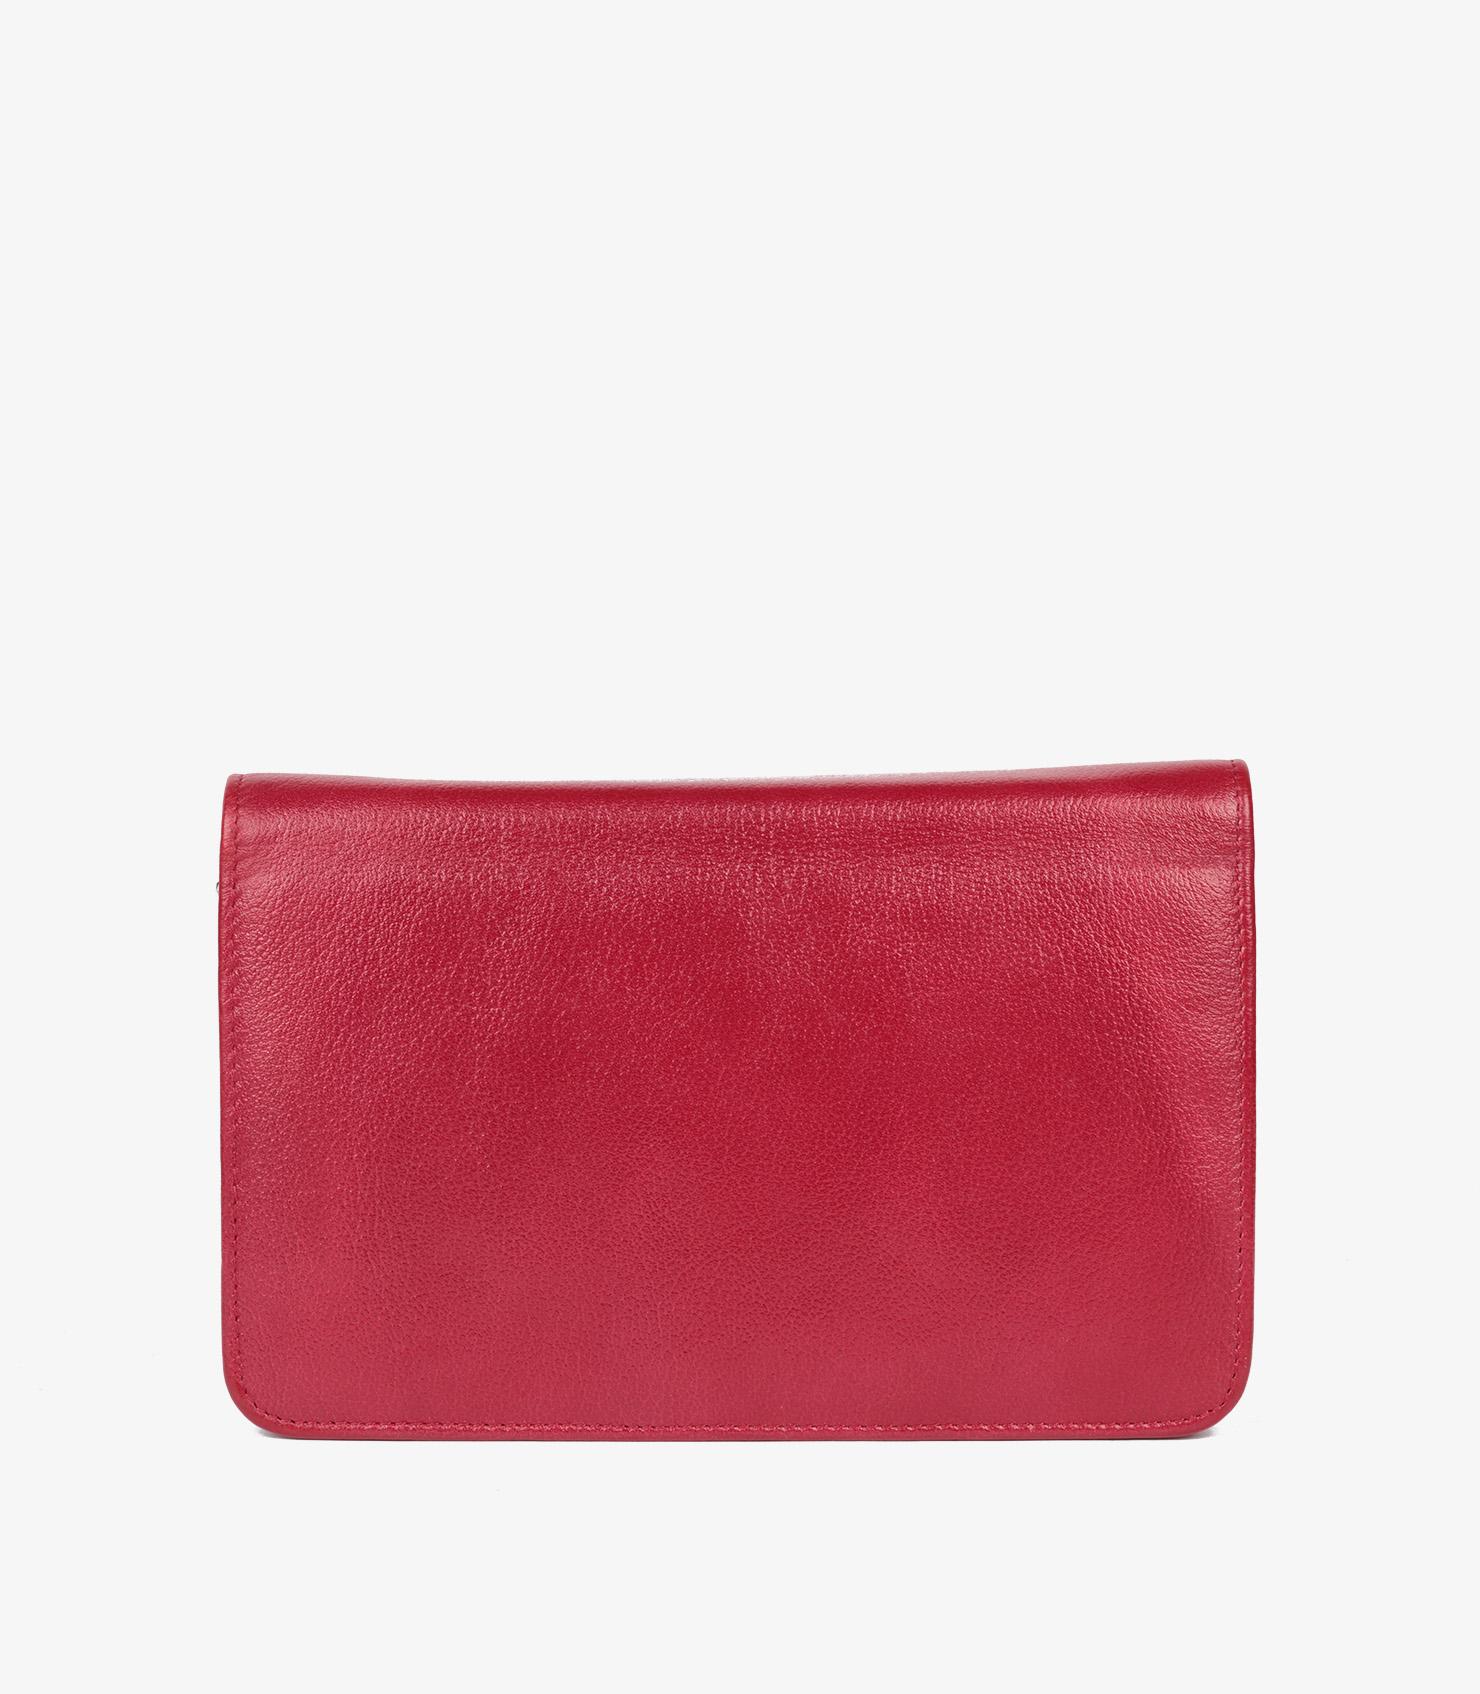 Chanel Red Goatskin Leather Mademoiselle Jacket Embossed Wallet-On-Chain WOC For Sale 2